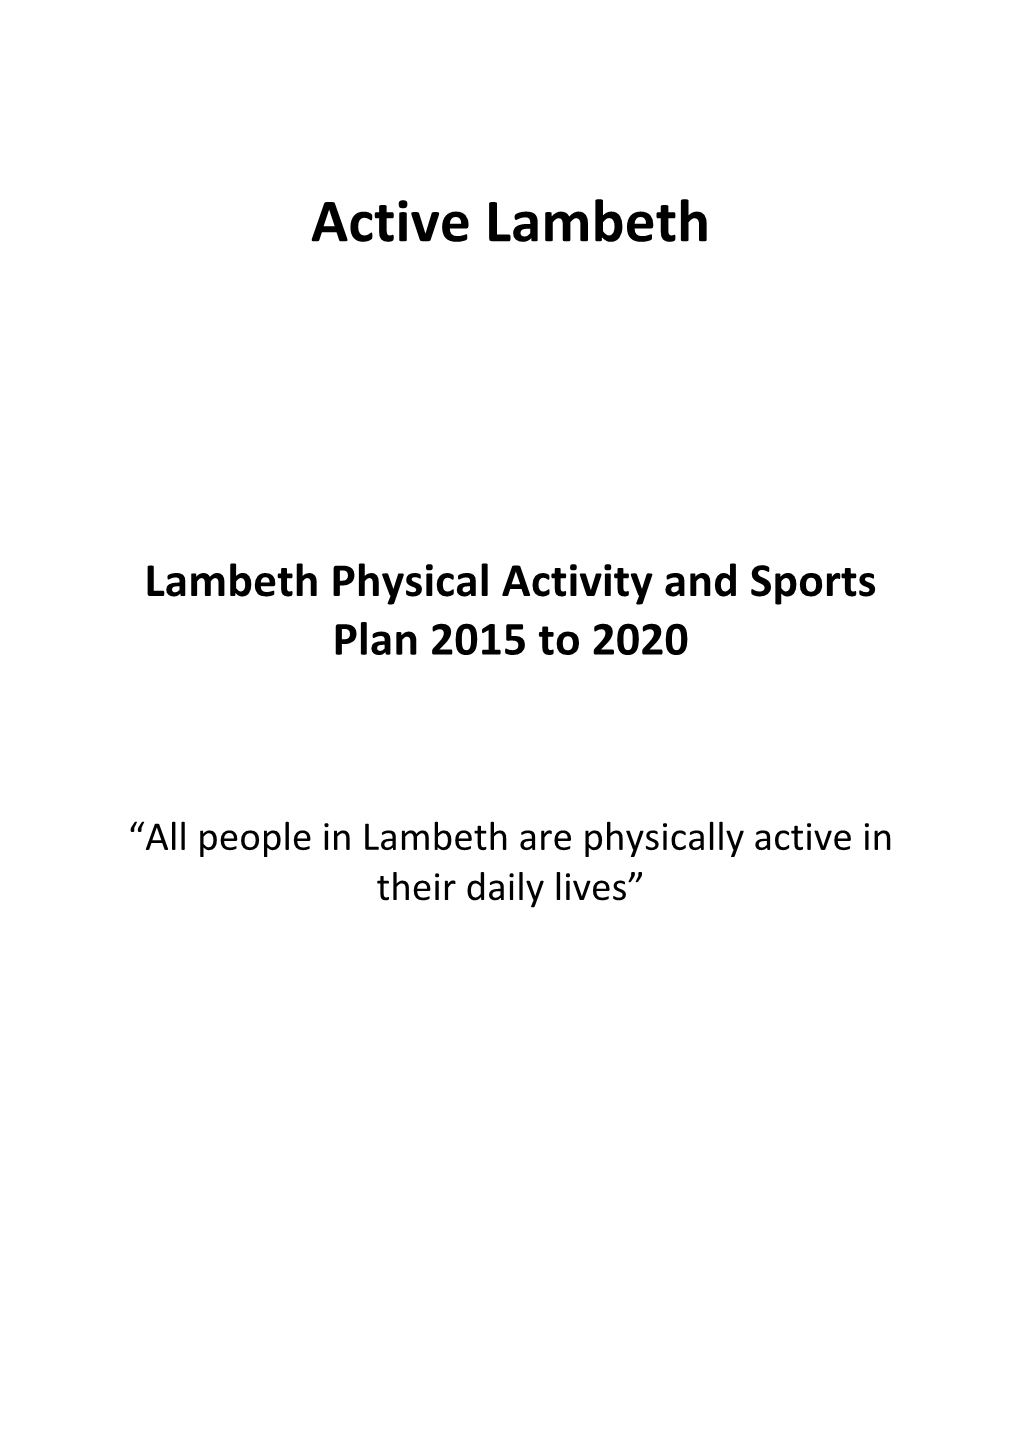 Lambeth Physical Activity and Sports Plan 2015 to 2020